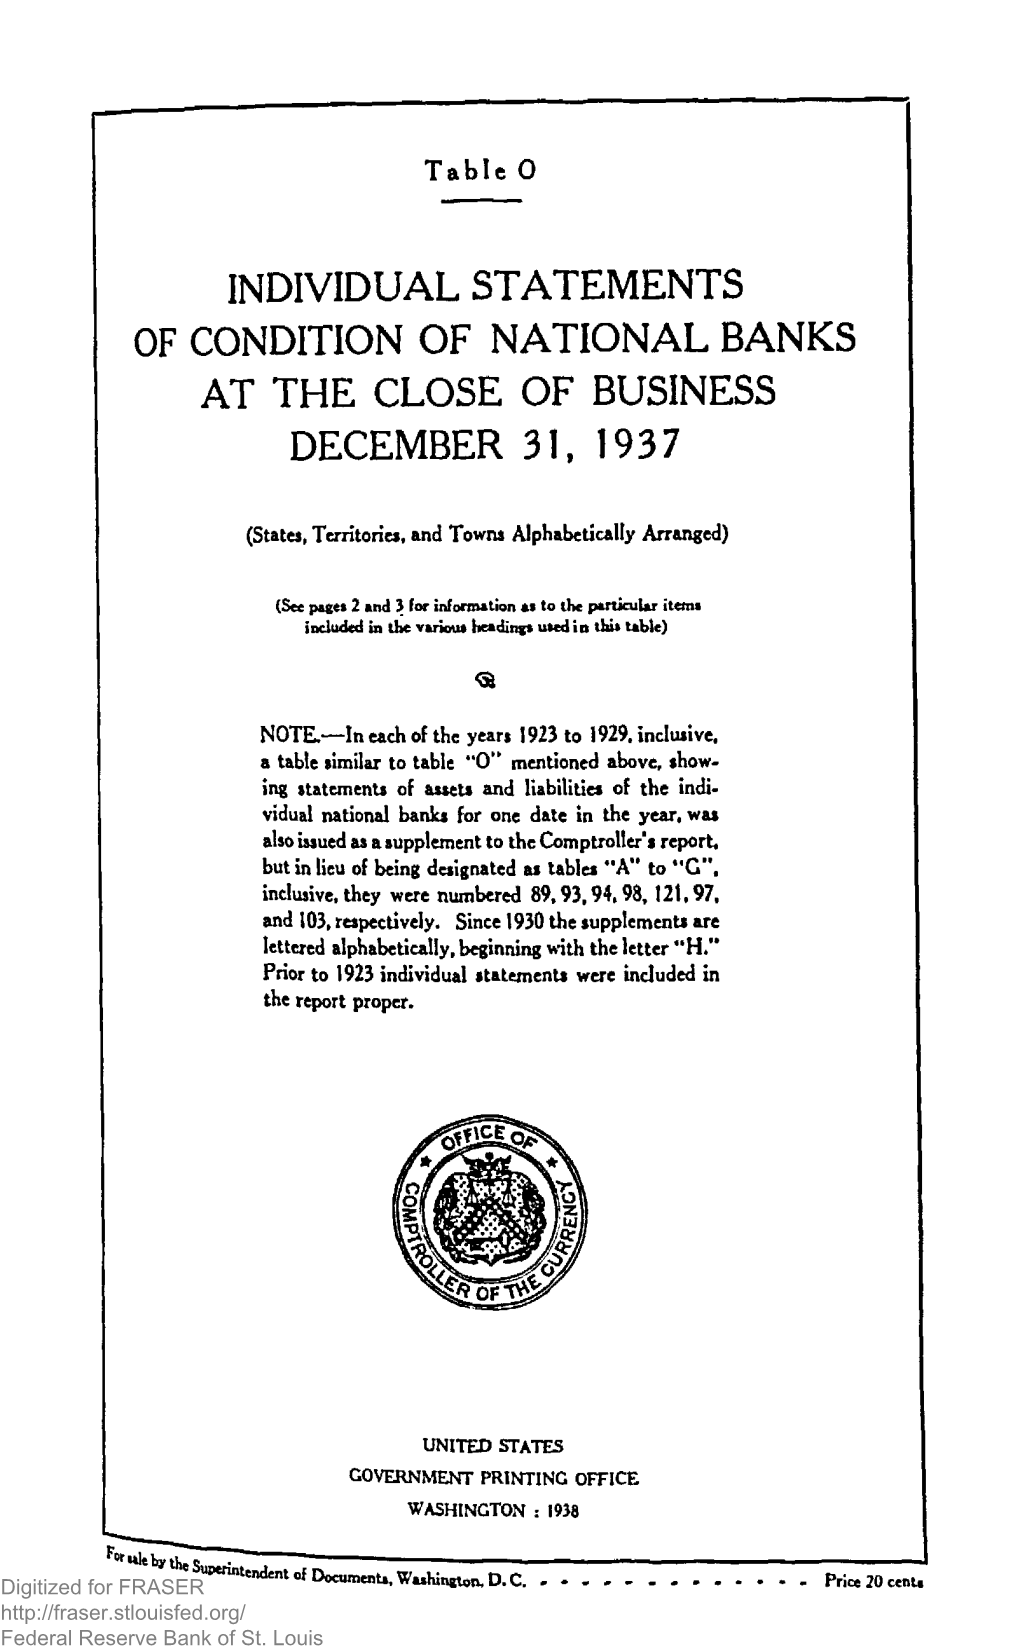 Individual Statements of Condition of National Banks at the Close of Business December 31, 1937